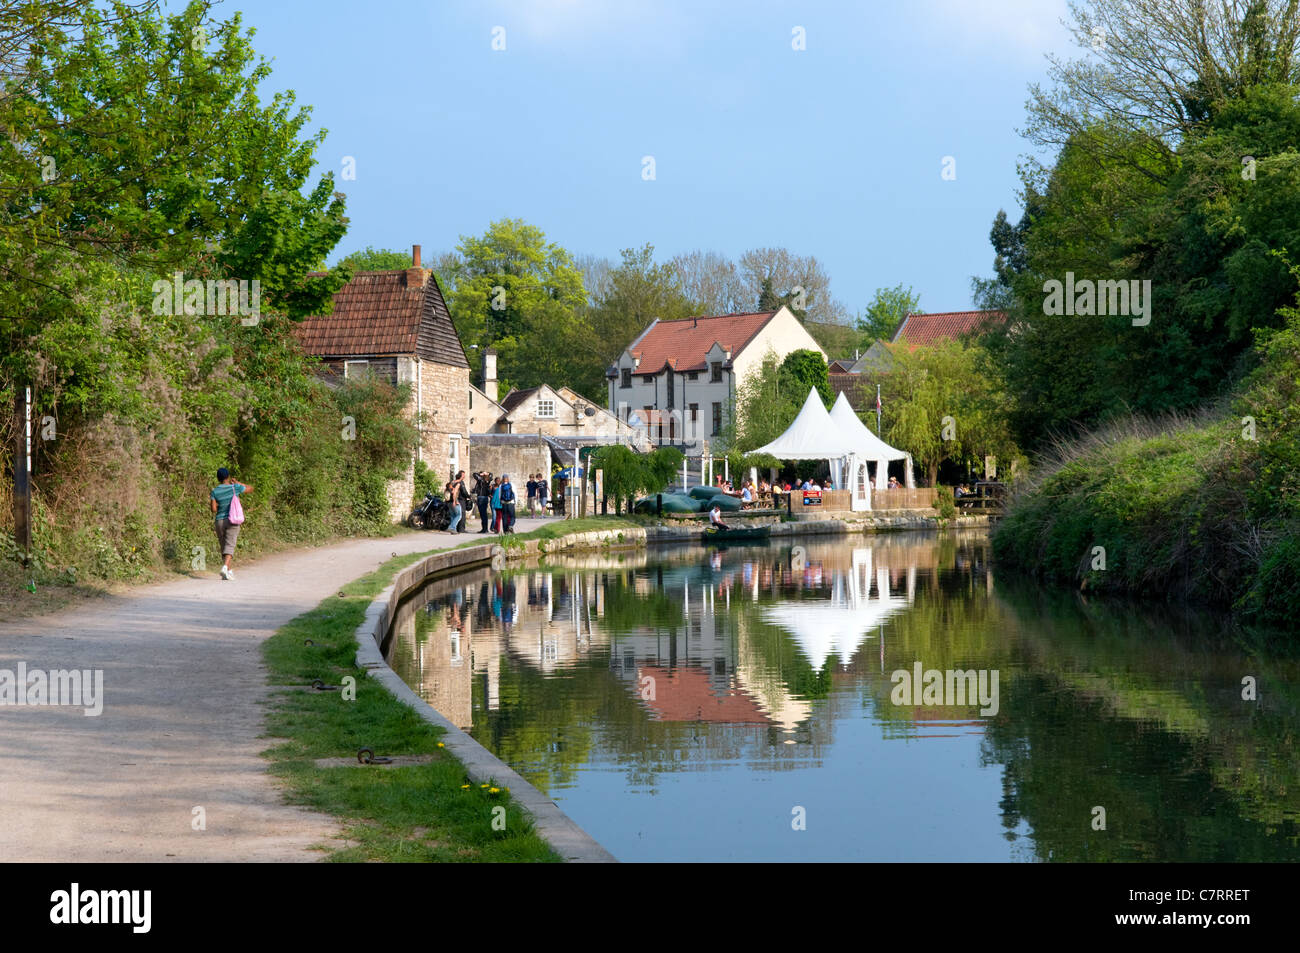 Lock Inn and towpath on Kennet and avon canal Bradford on Avon taken on fine day Stock Photo